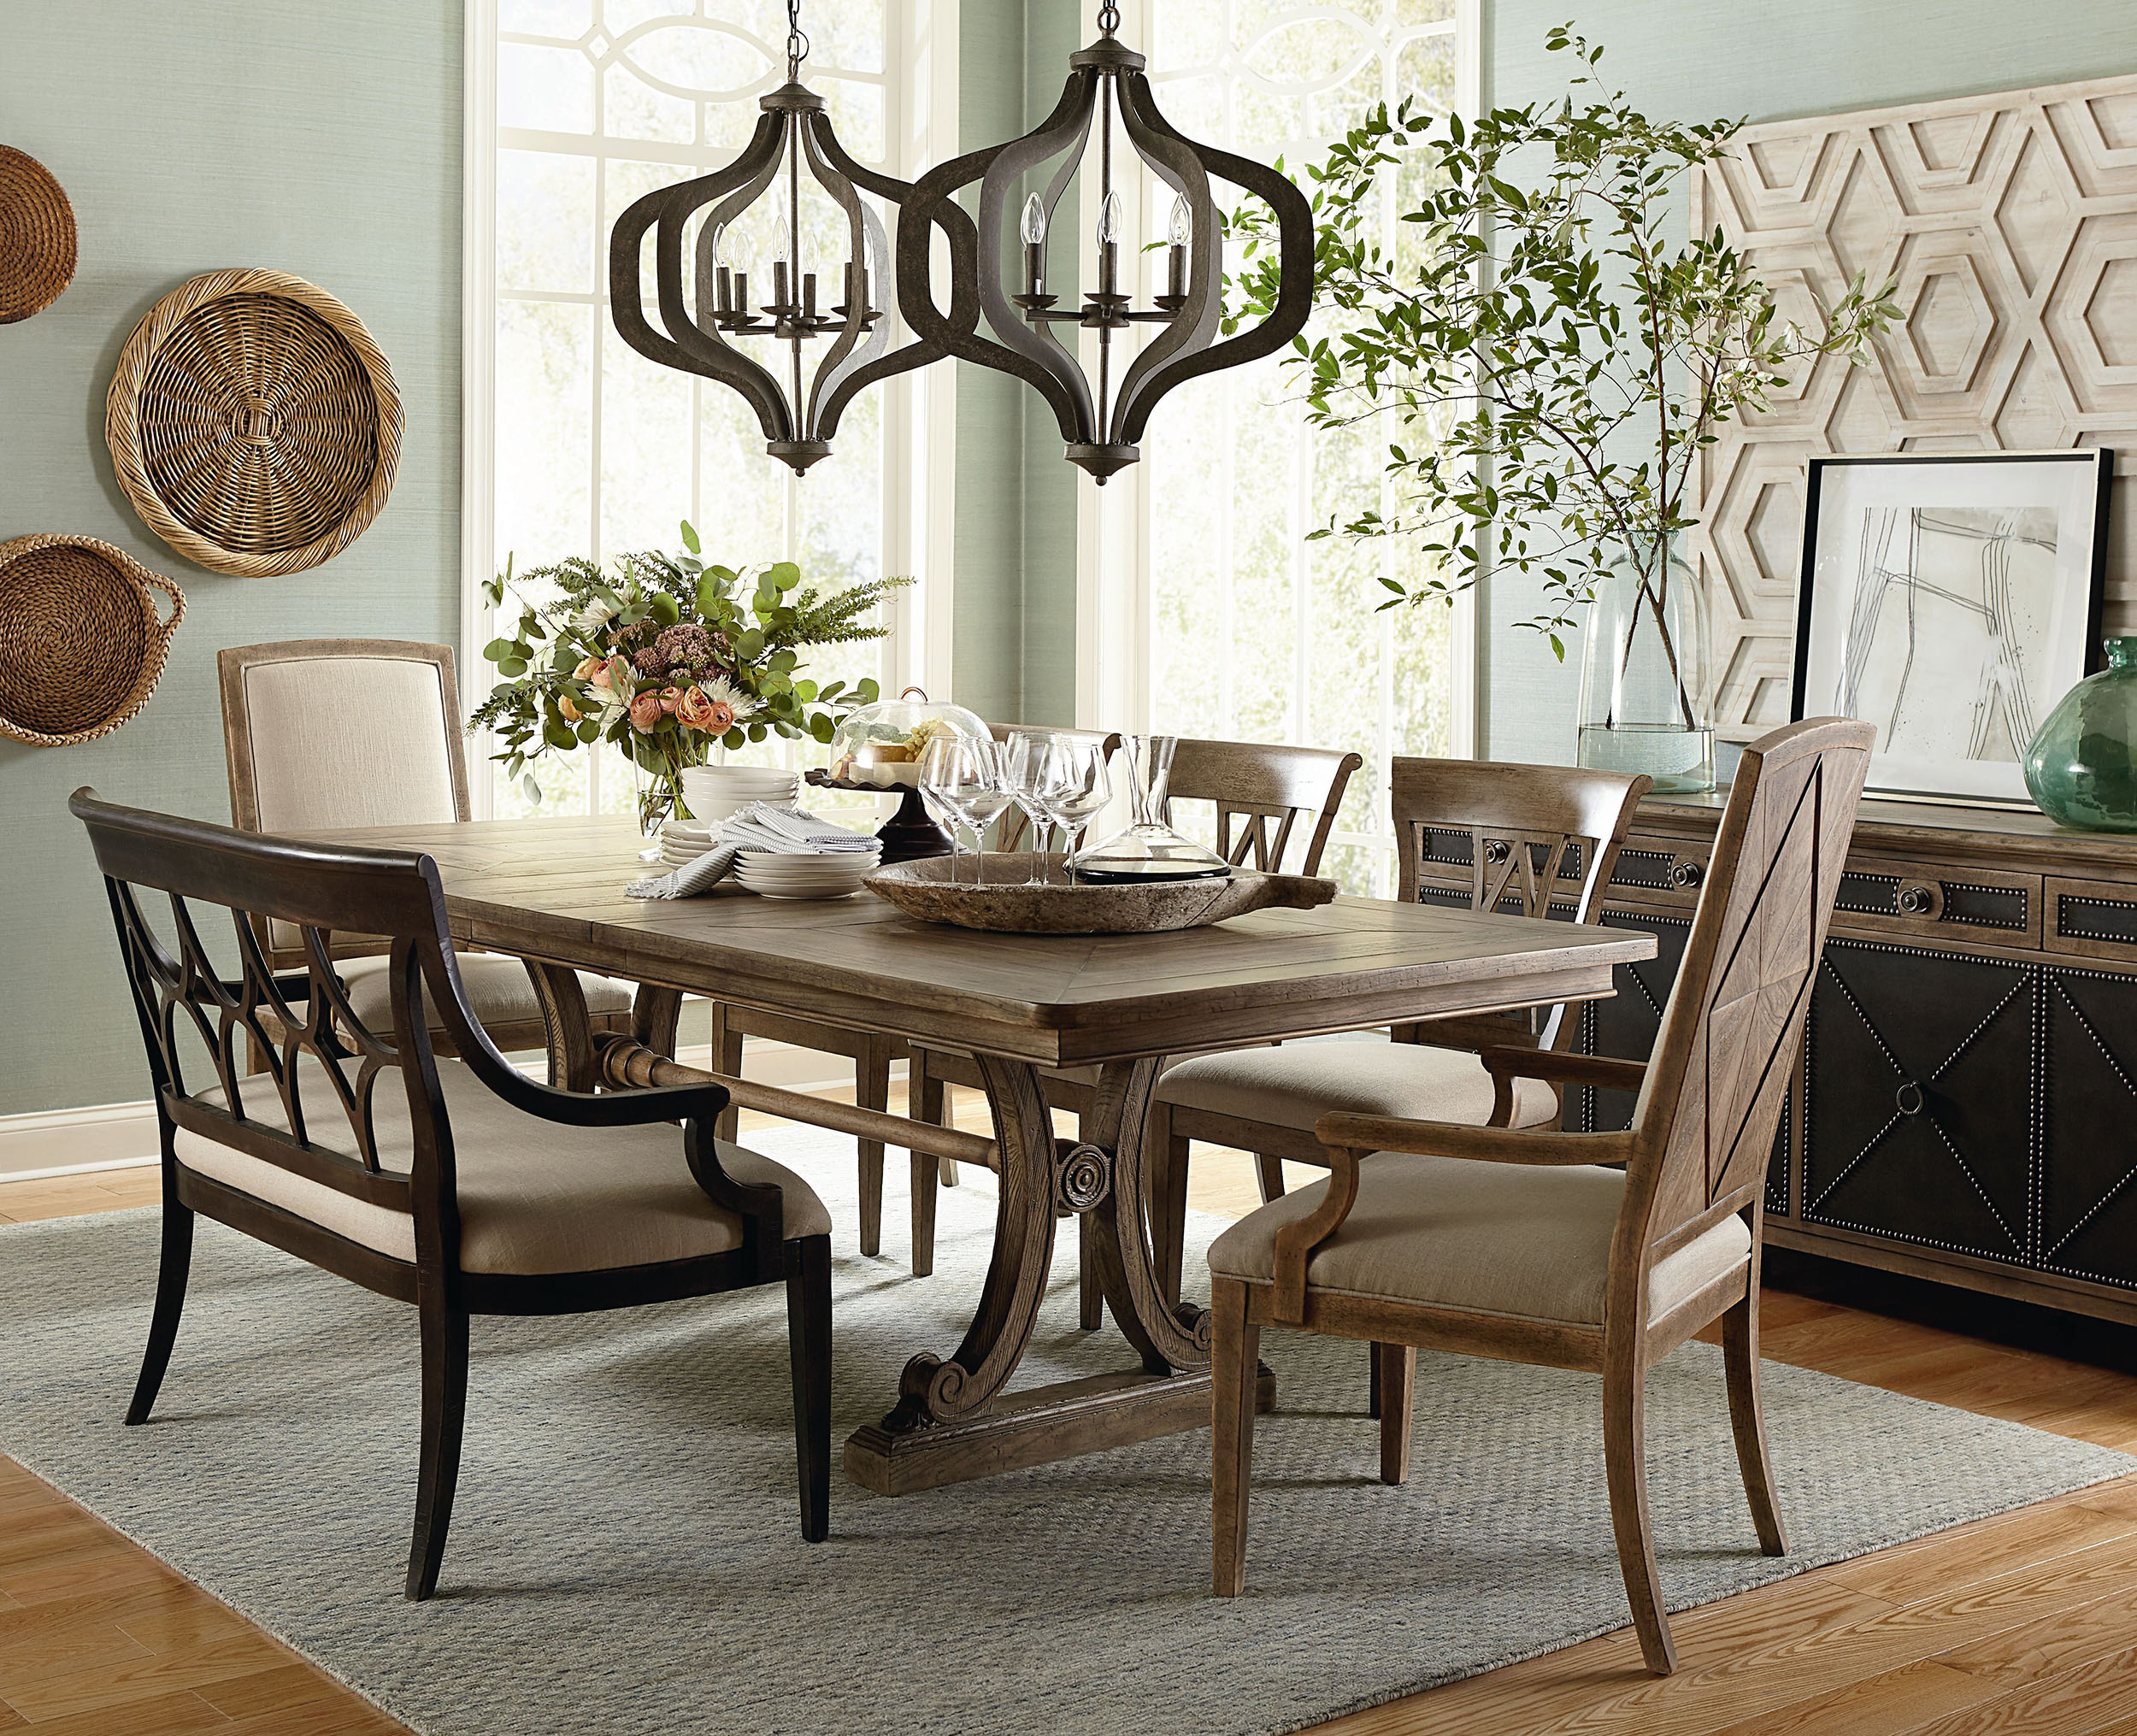 Requirements For A Formal Dining Room